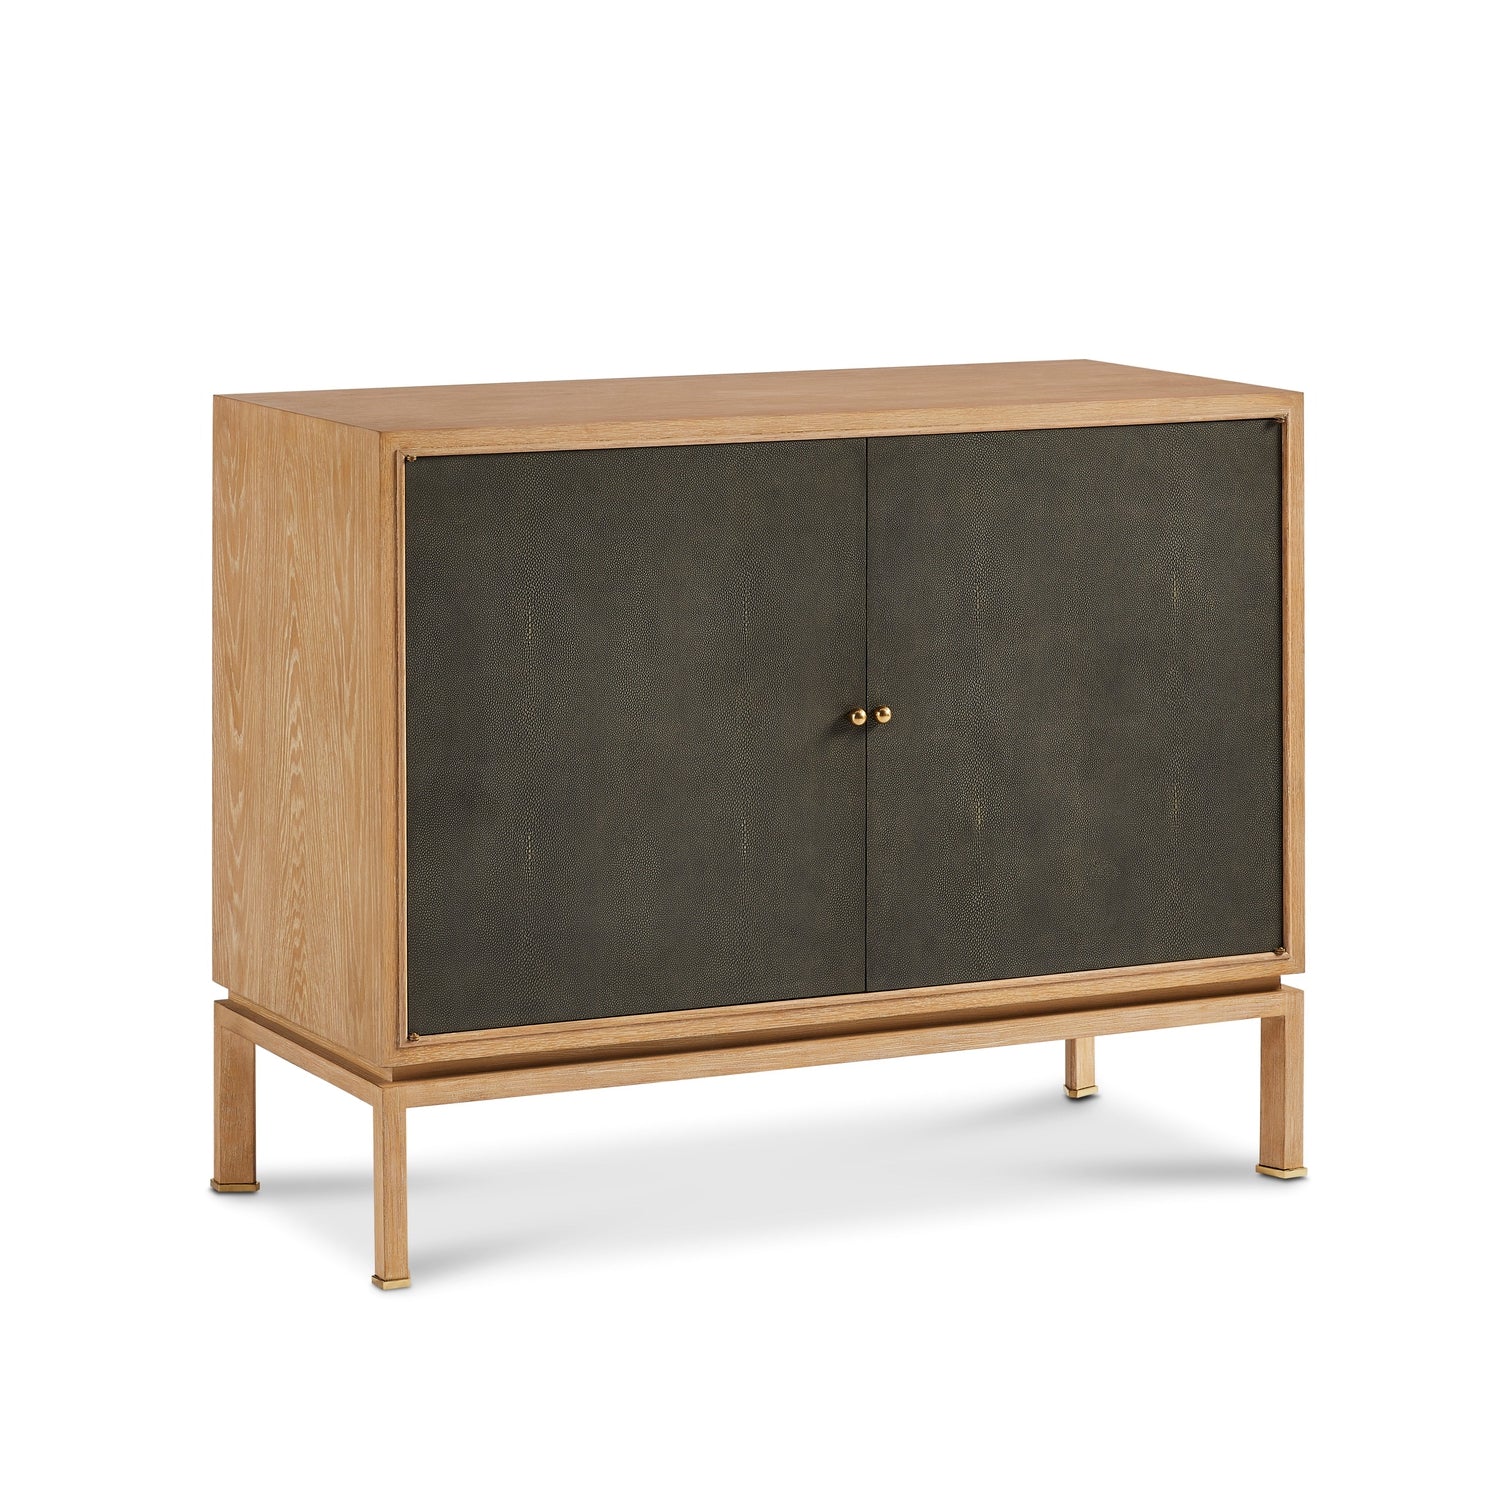 Mr. and Mrs. Howard, Archie Two-Door Shagreen Cabinet